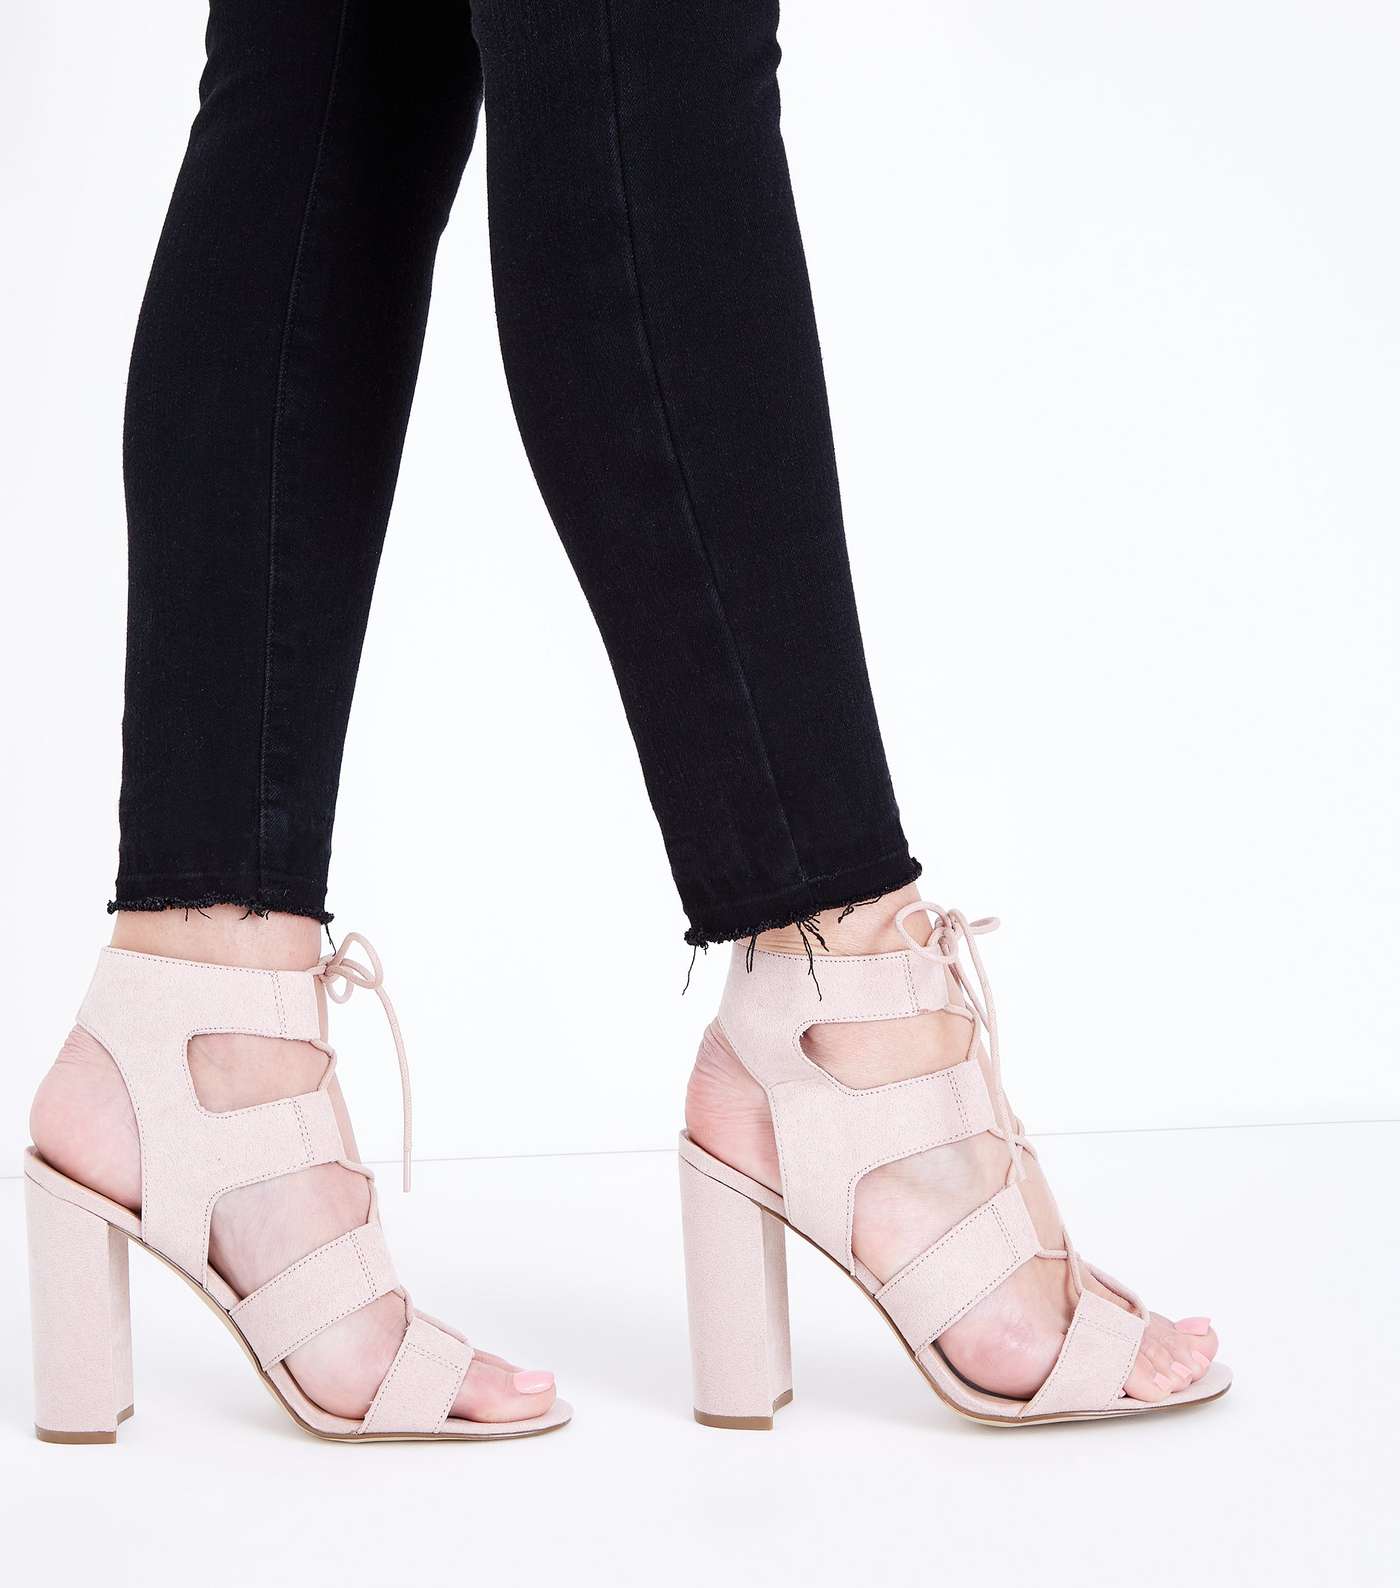 Nude Suedette Lace Up Cut-Out Block Heels Image 2